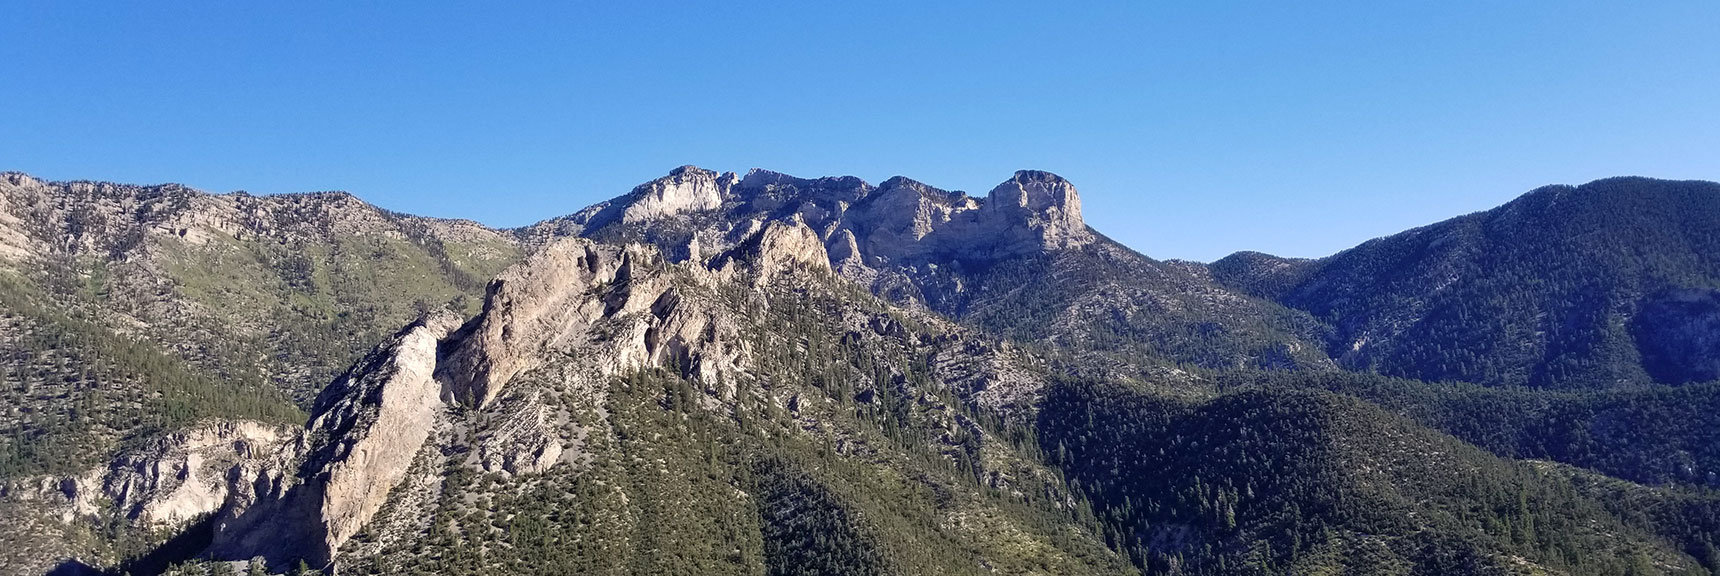 View of Mummy Mountain from Cathedral Rock Summit, Mt. Charleston Wilderness, Nevada